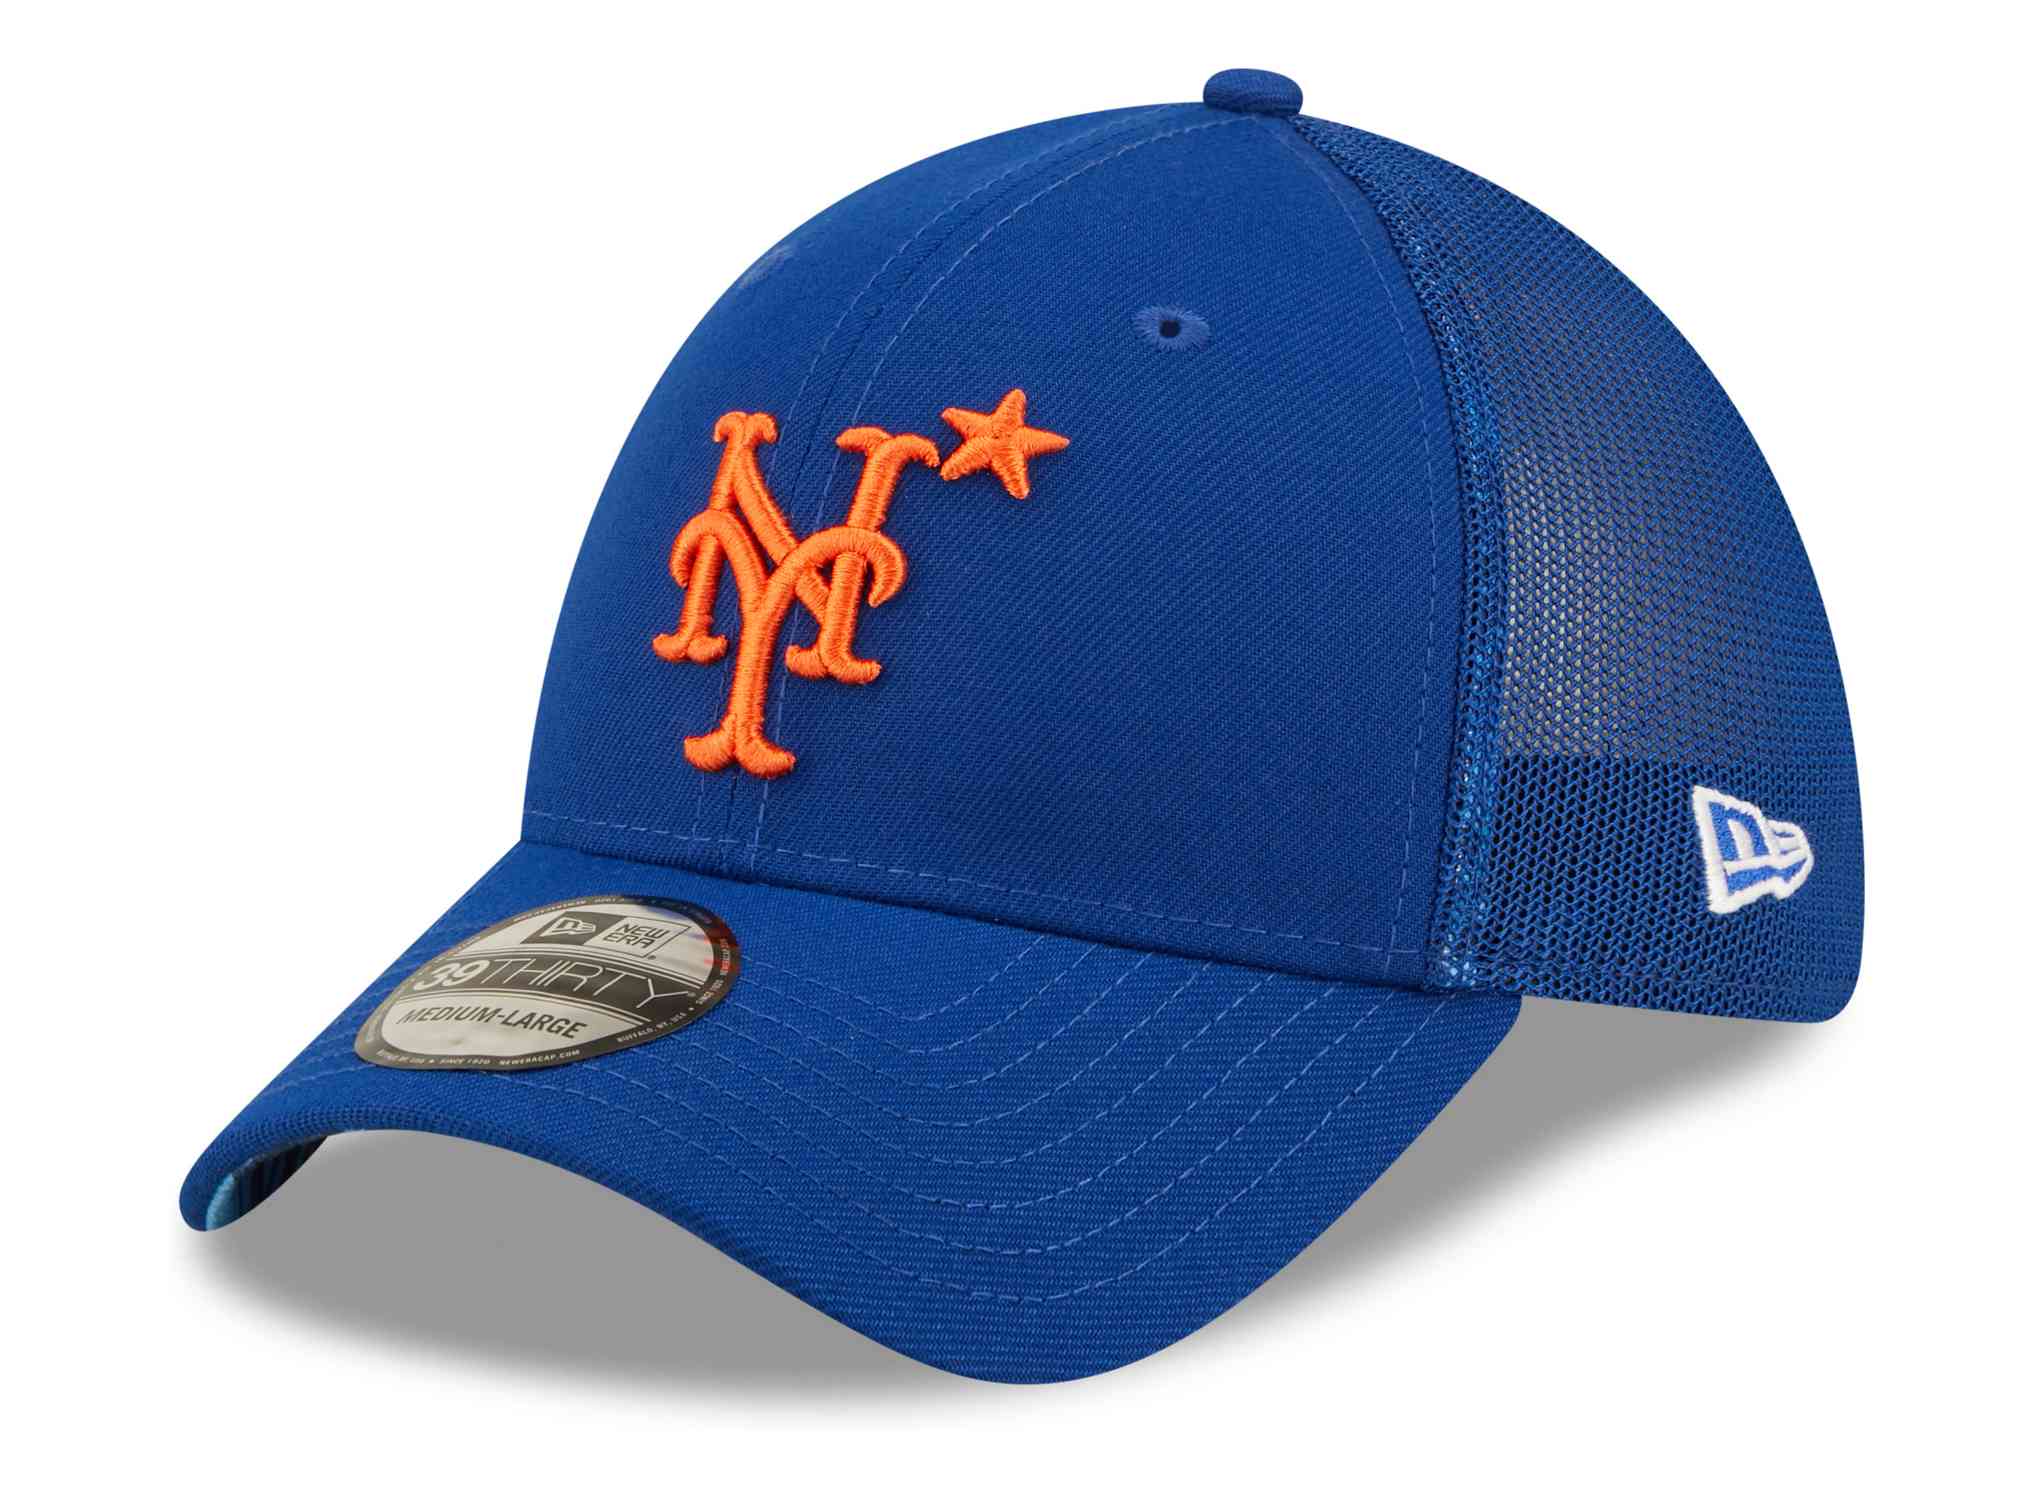 New Era - MLB New York Mets All Star Game Patch 39Thirty